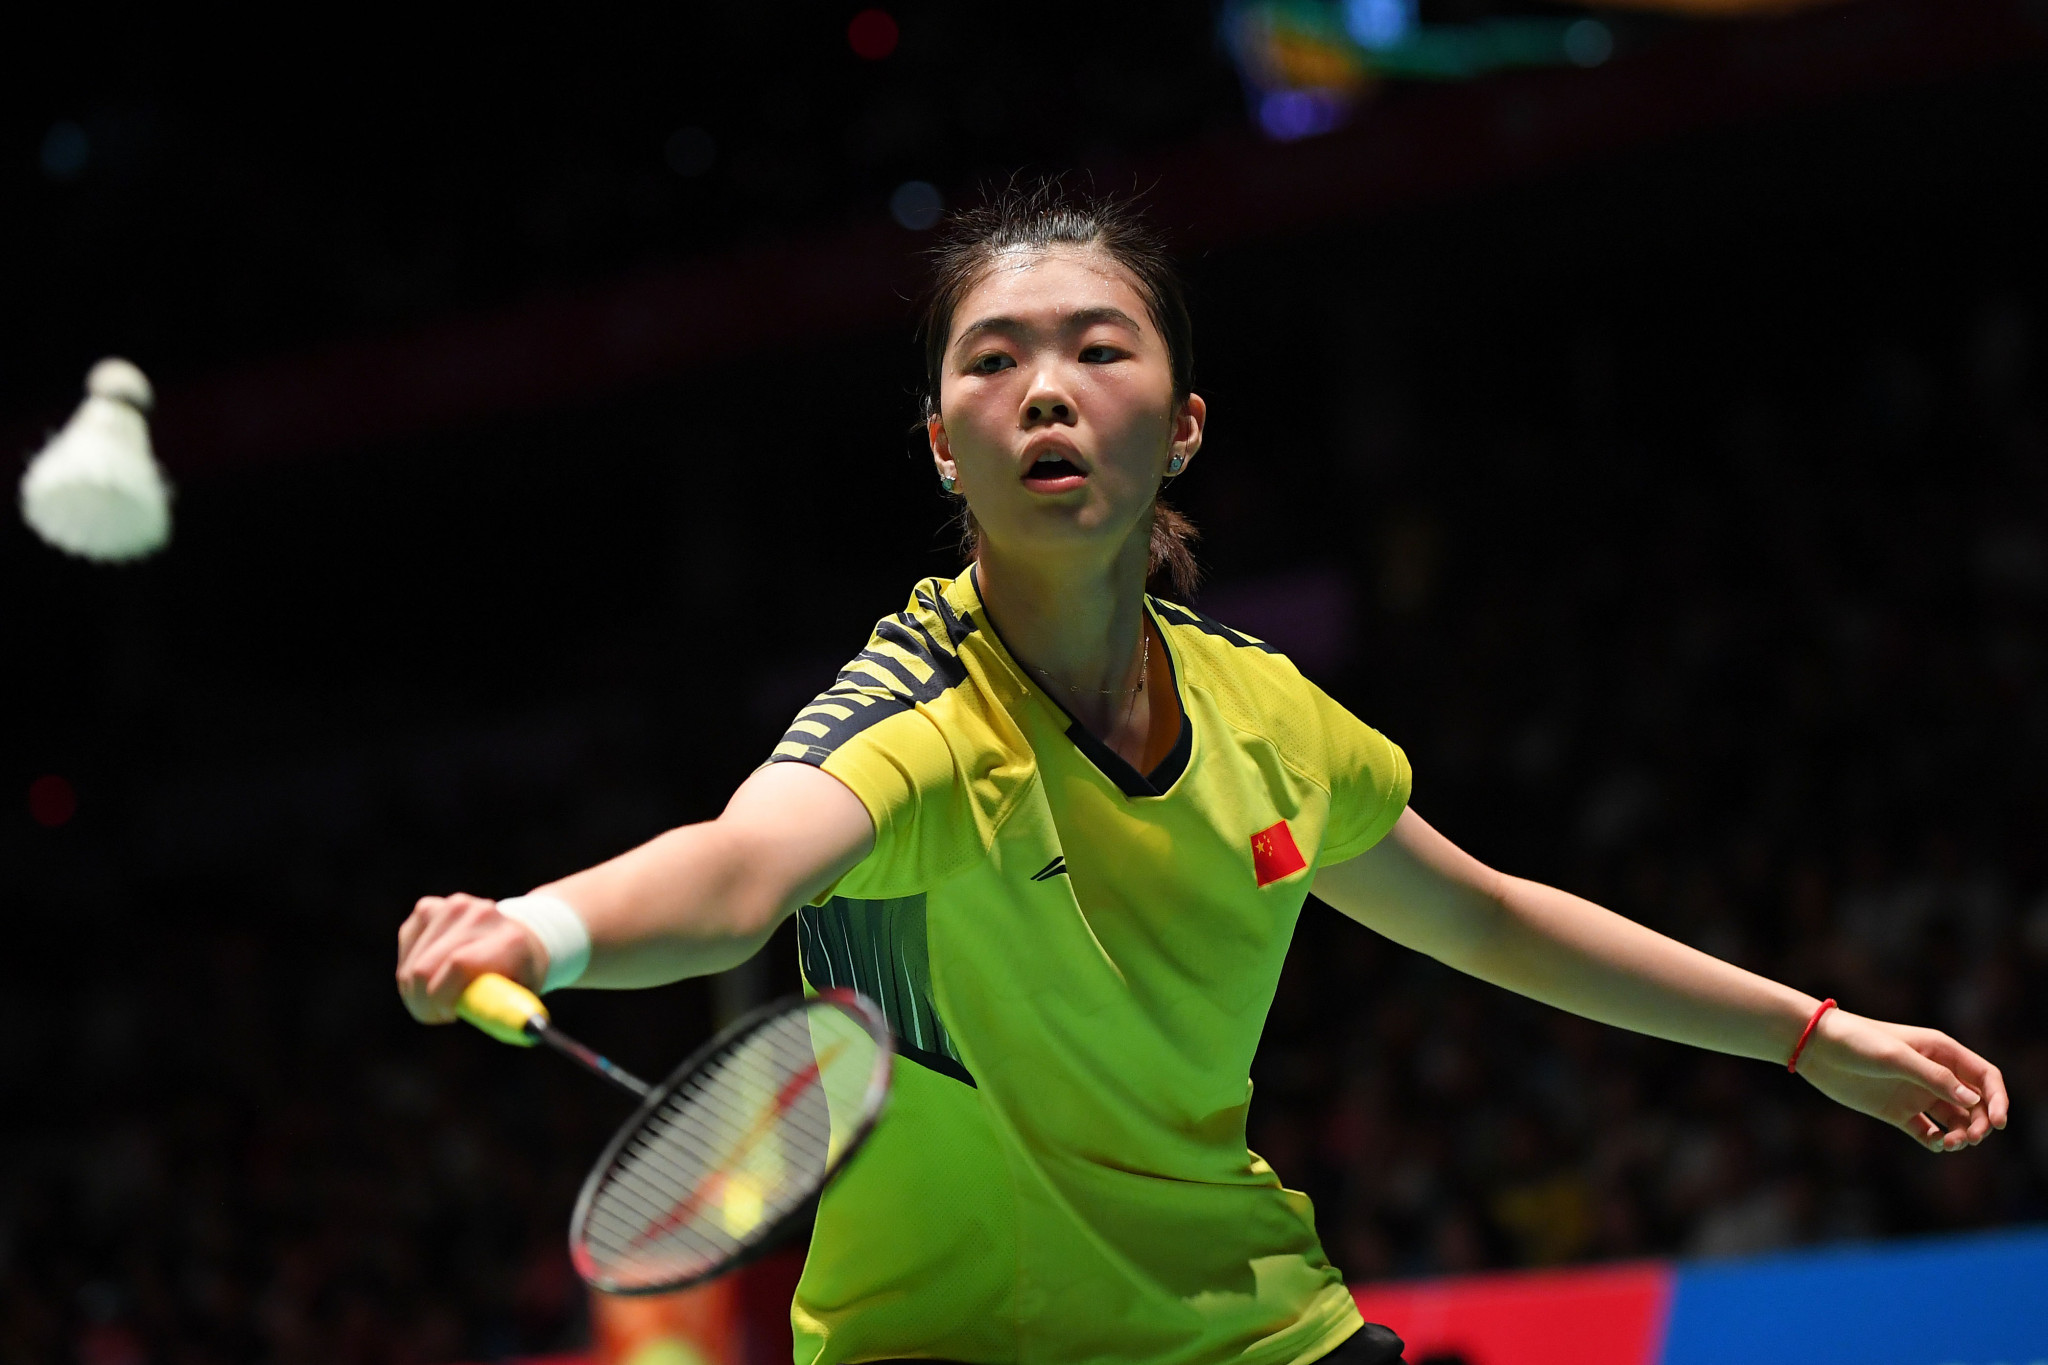 China's Gao Fangjie retired injured from her match against Spain's Carolina Marin ©Getty Images